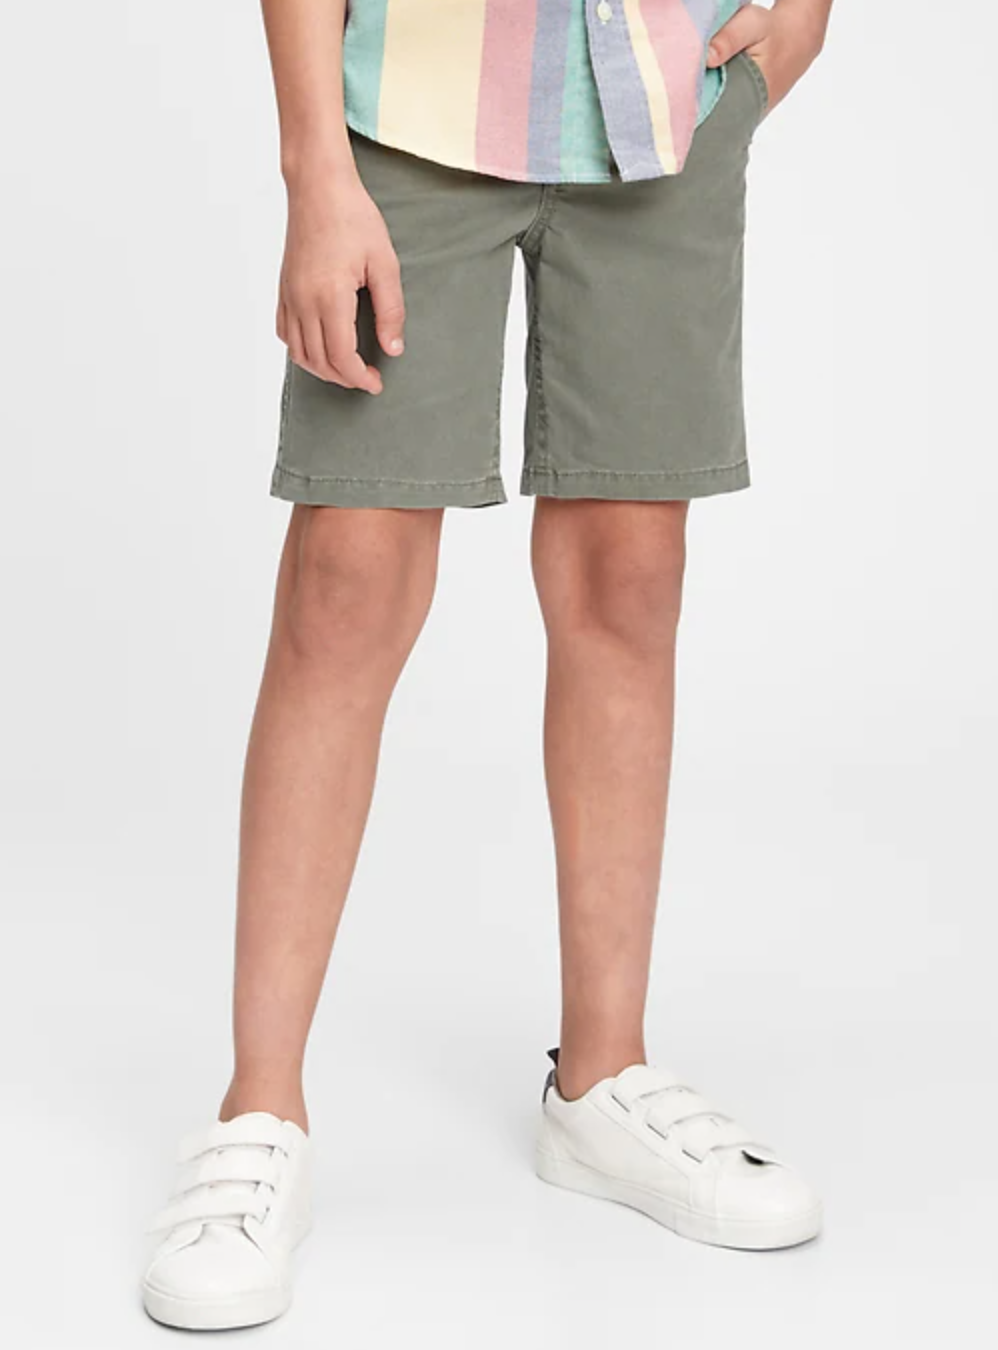 Kids woven shorts with washwell. Png